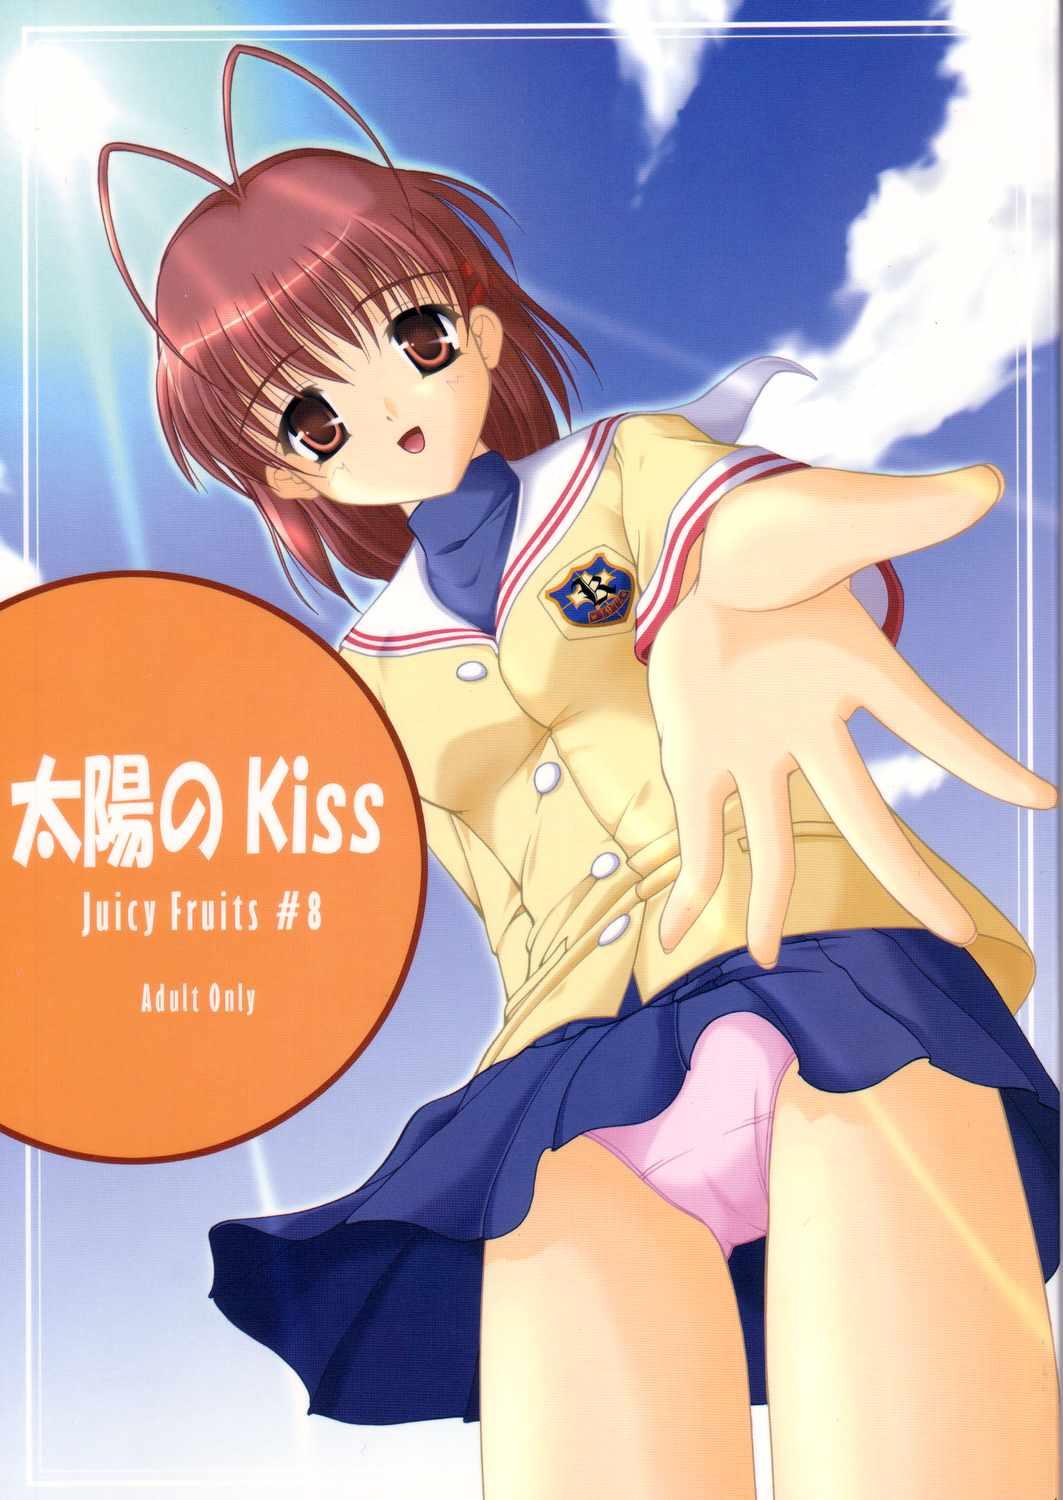 Cfnm Taiyou no Kiss - Clannad Livecam - Page 1